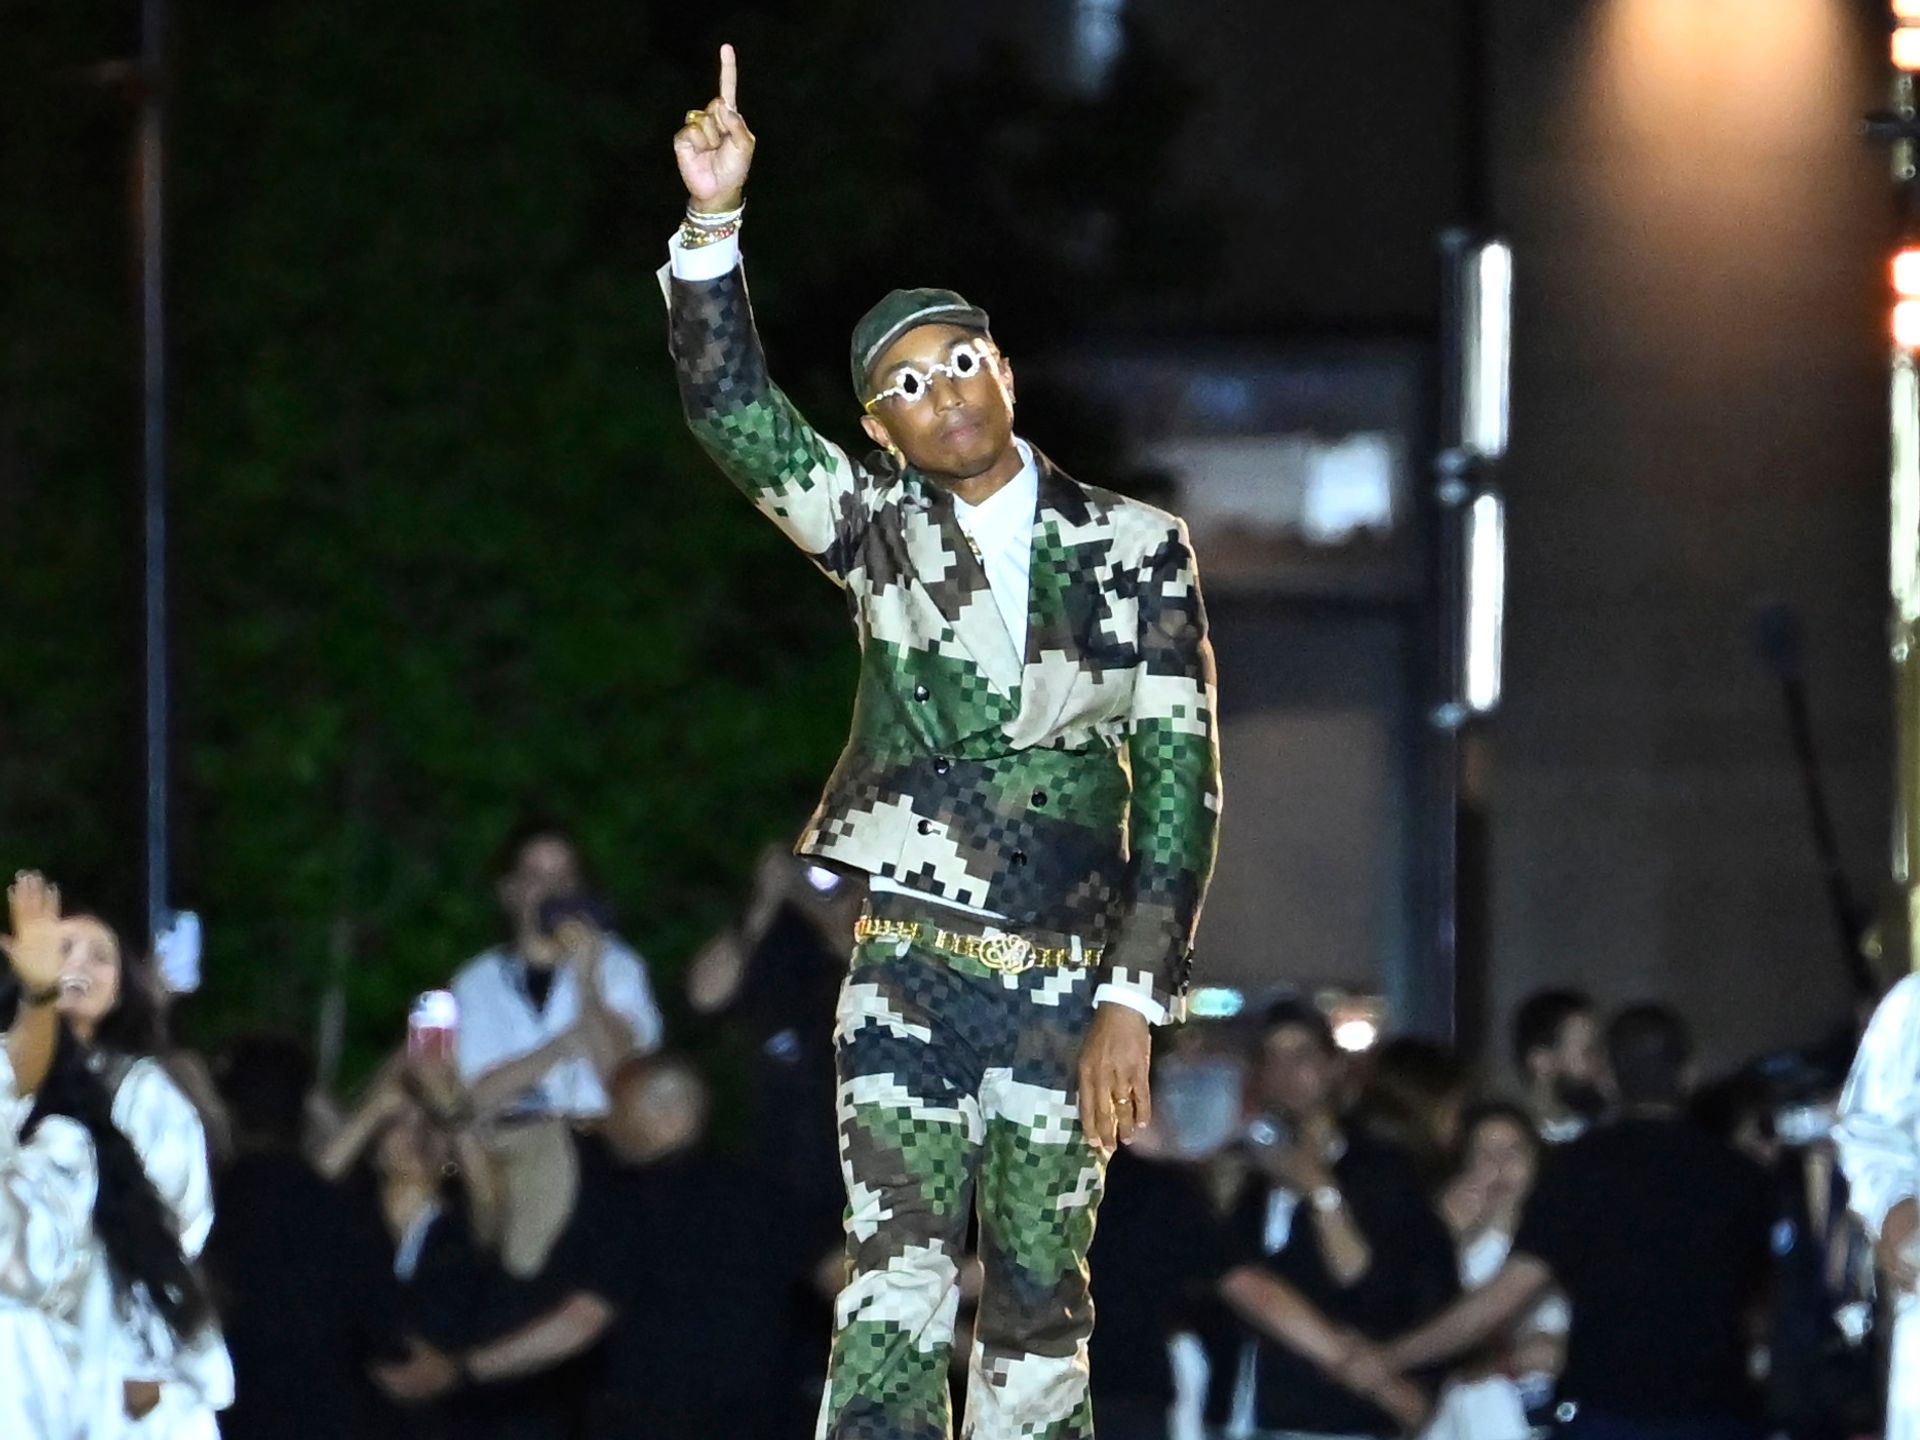 Jay Z pauses his performance at the Louis Vuitton show to check